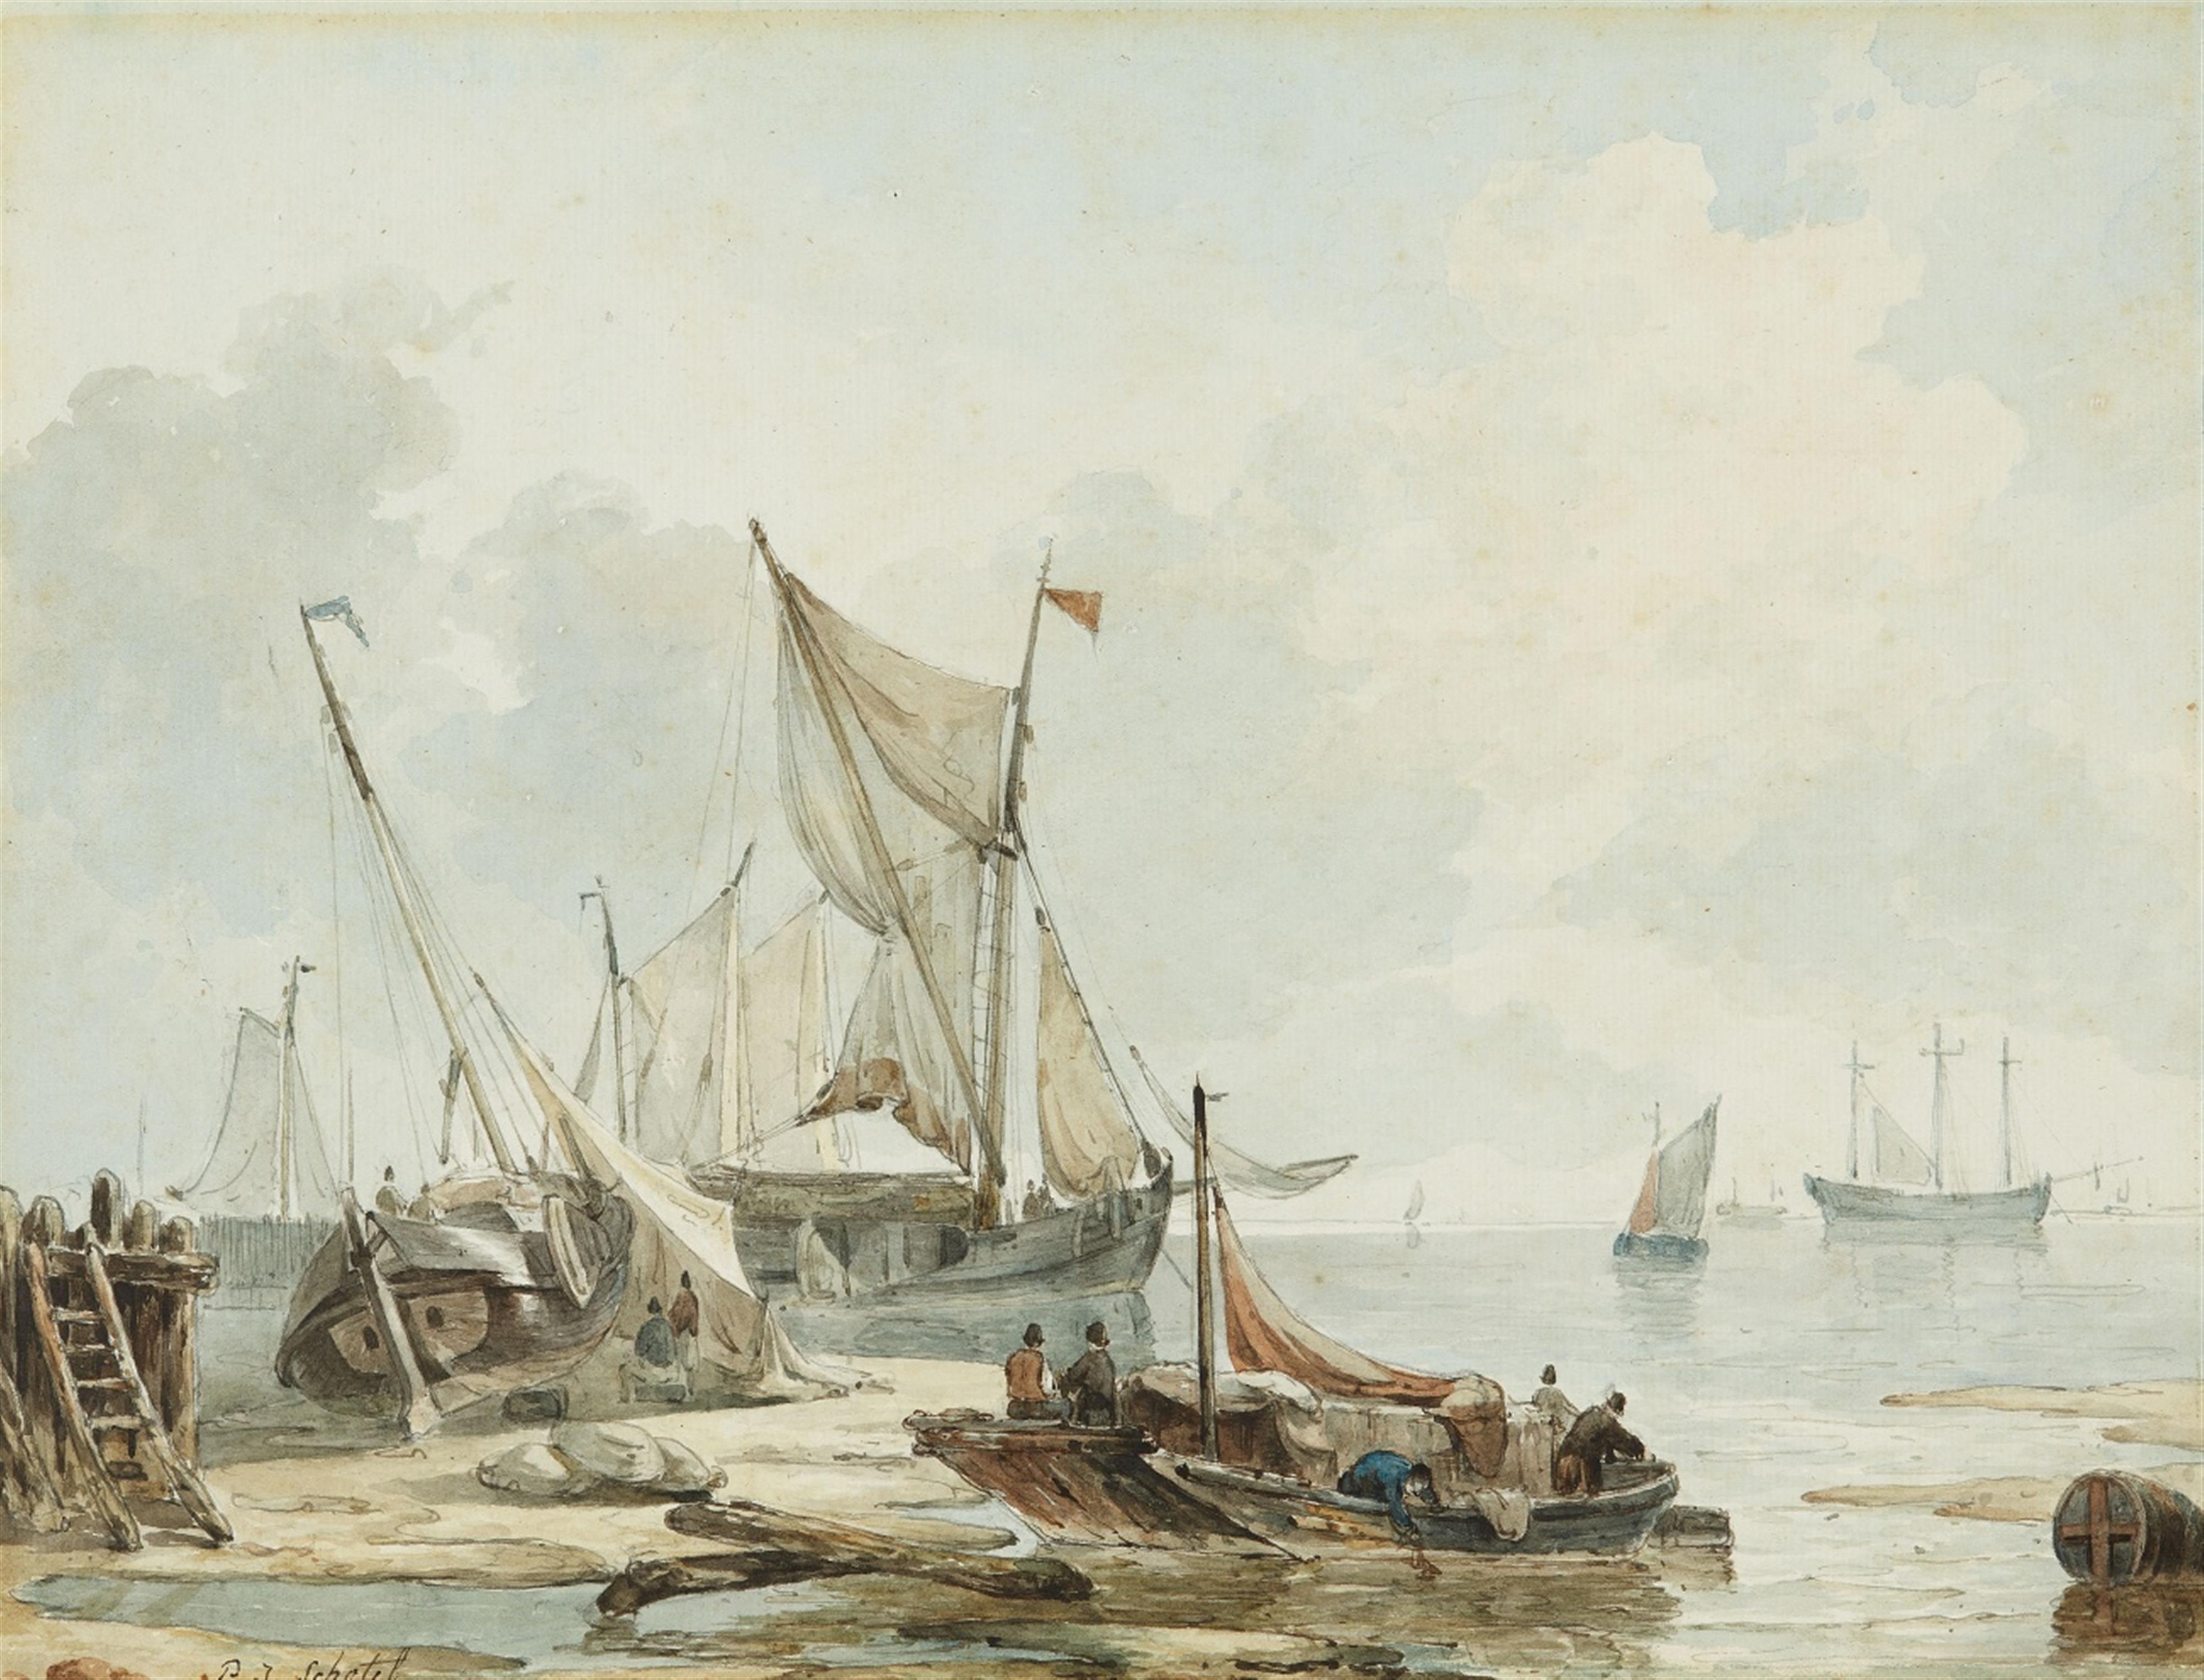 Petrus Johannes Schotel - River Landscape with Cargo Boats and Sailing Ships - image-1